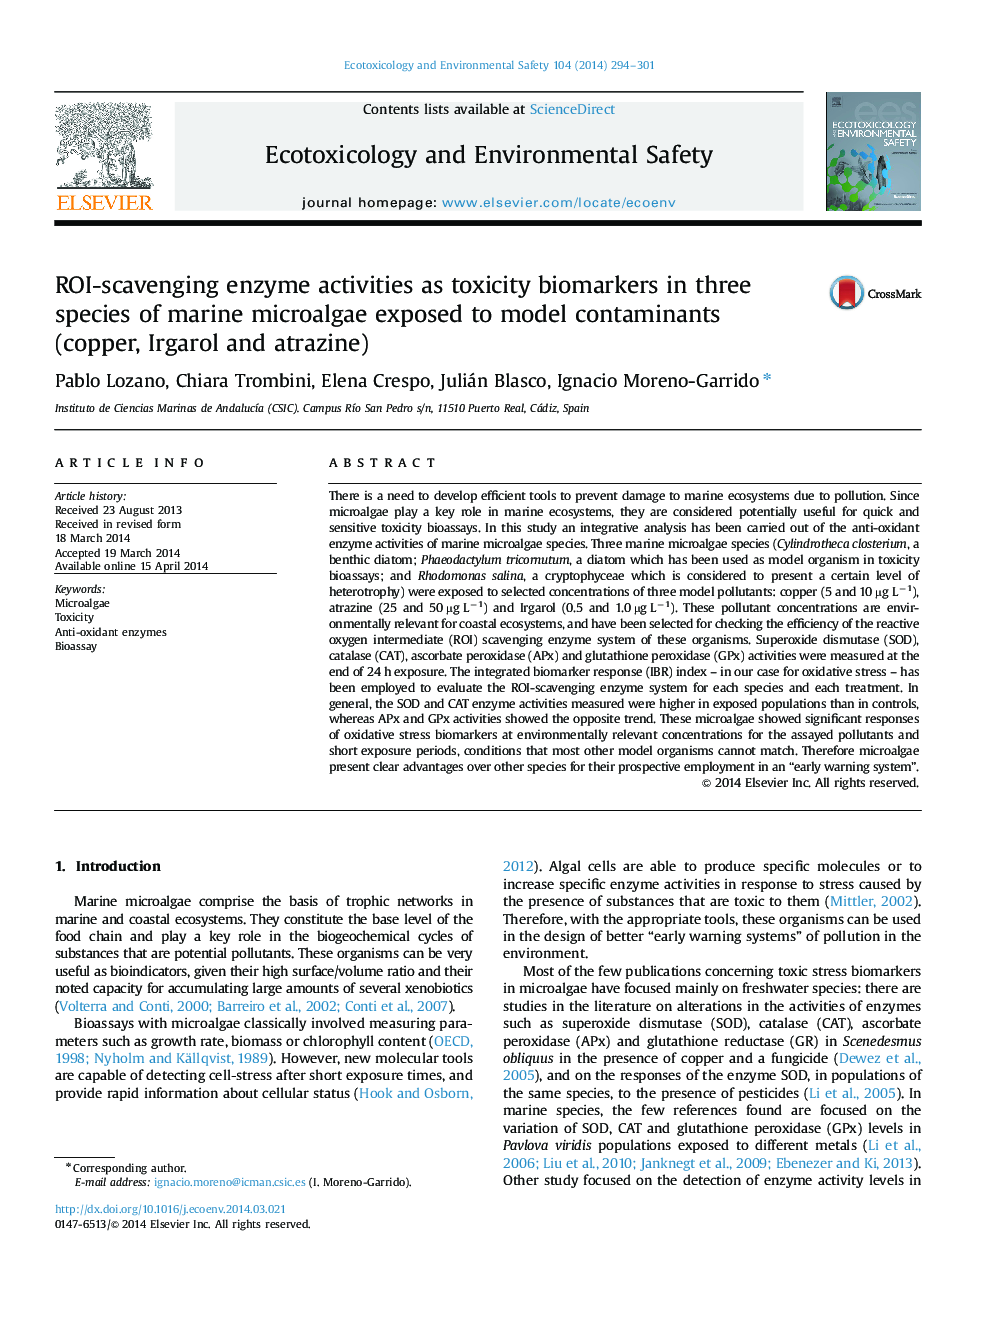 ROI-scavenging enzyme activities as toxicity biomarkers in three species of marine microalgae exposed to model contaminants (copper, Irgarol and atrazine)